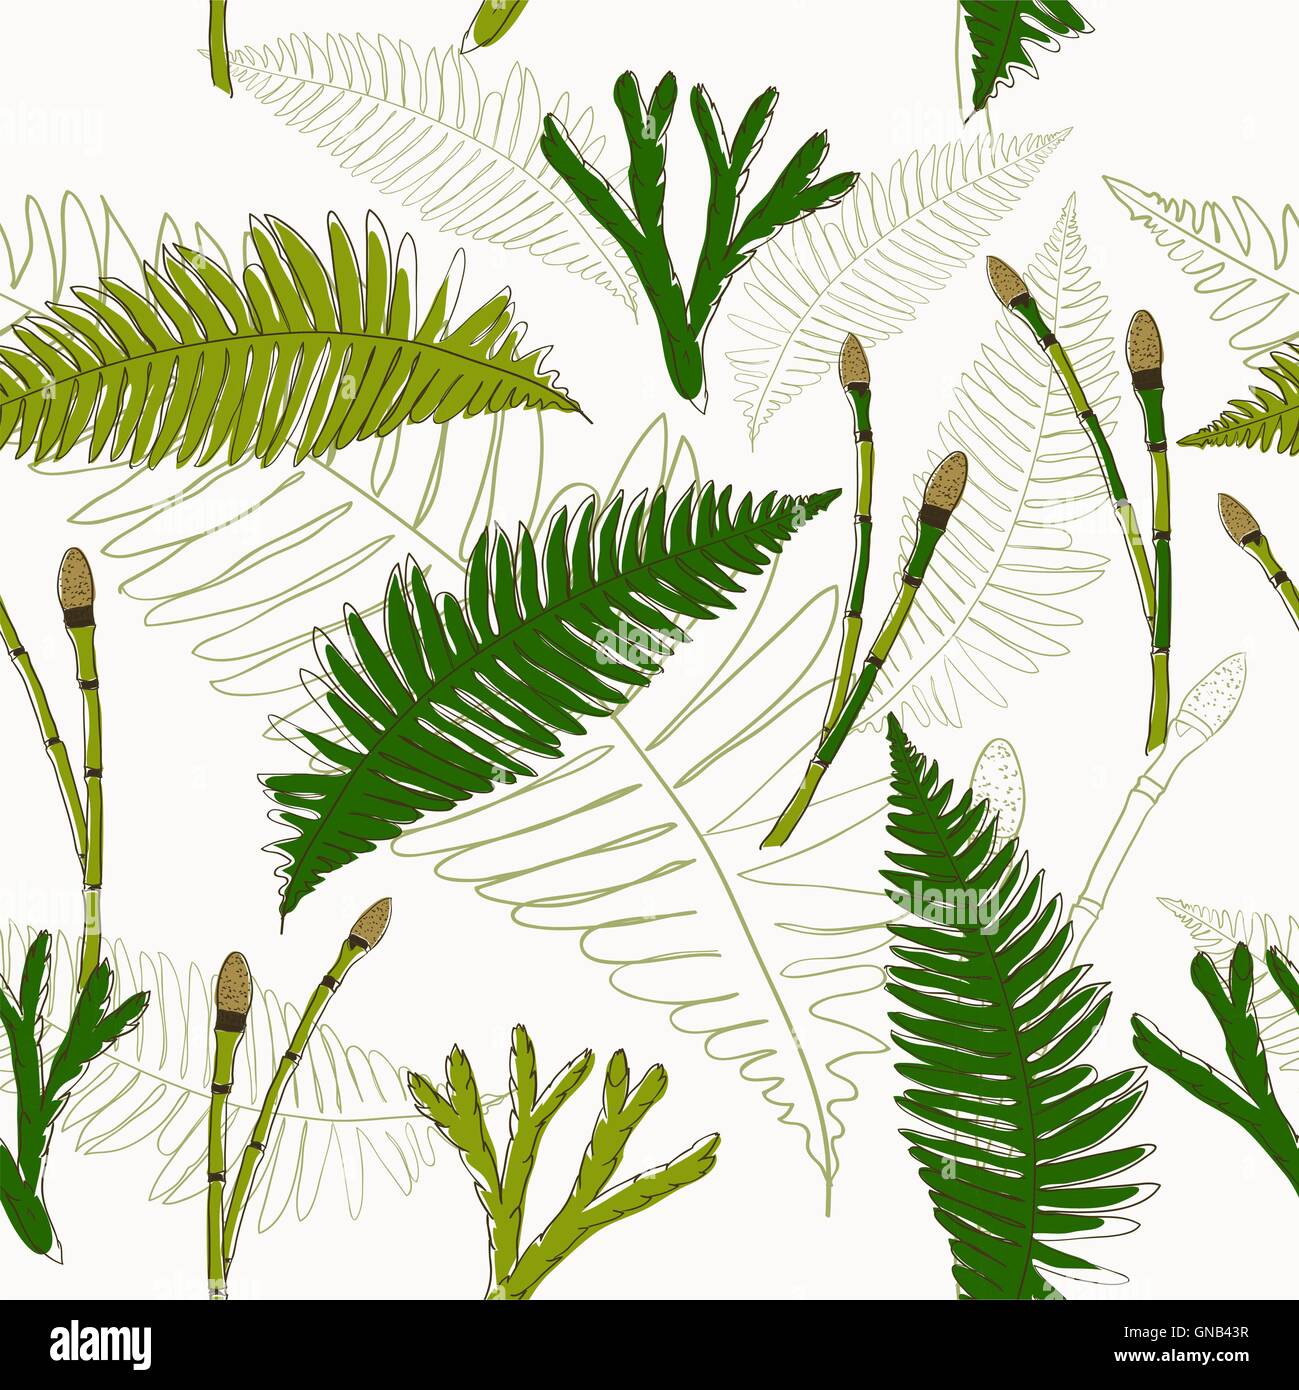 Seamless texture in eco style. Stock Vector